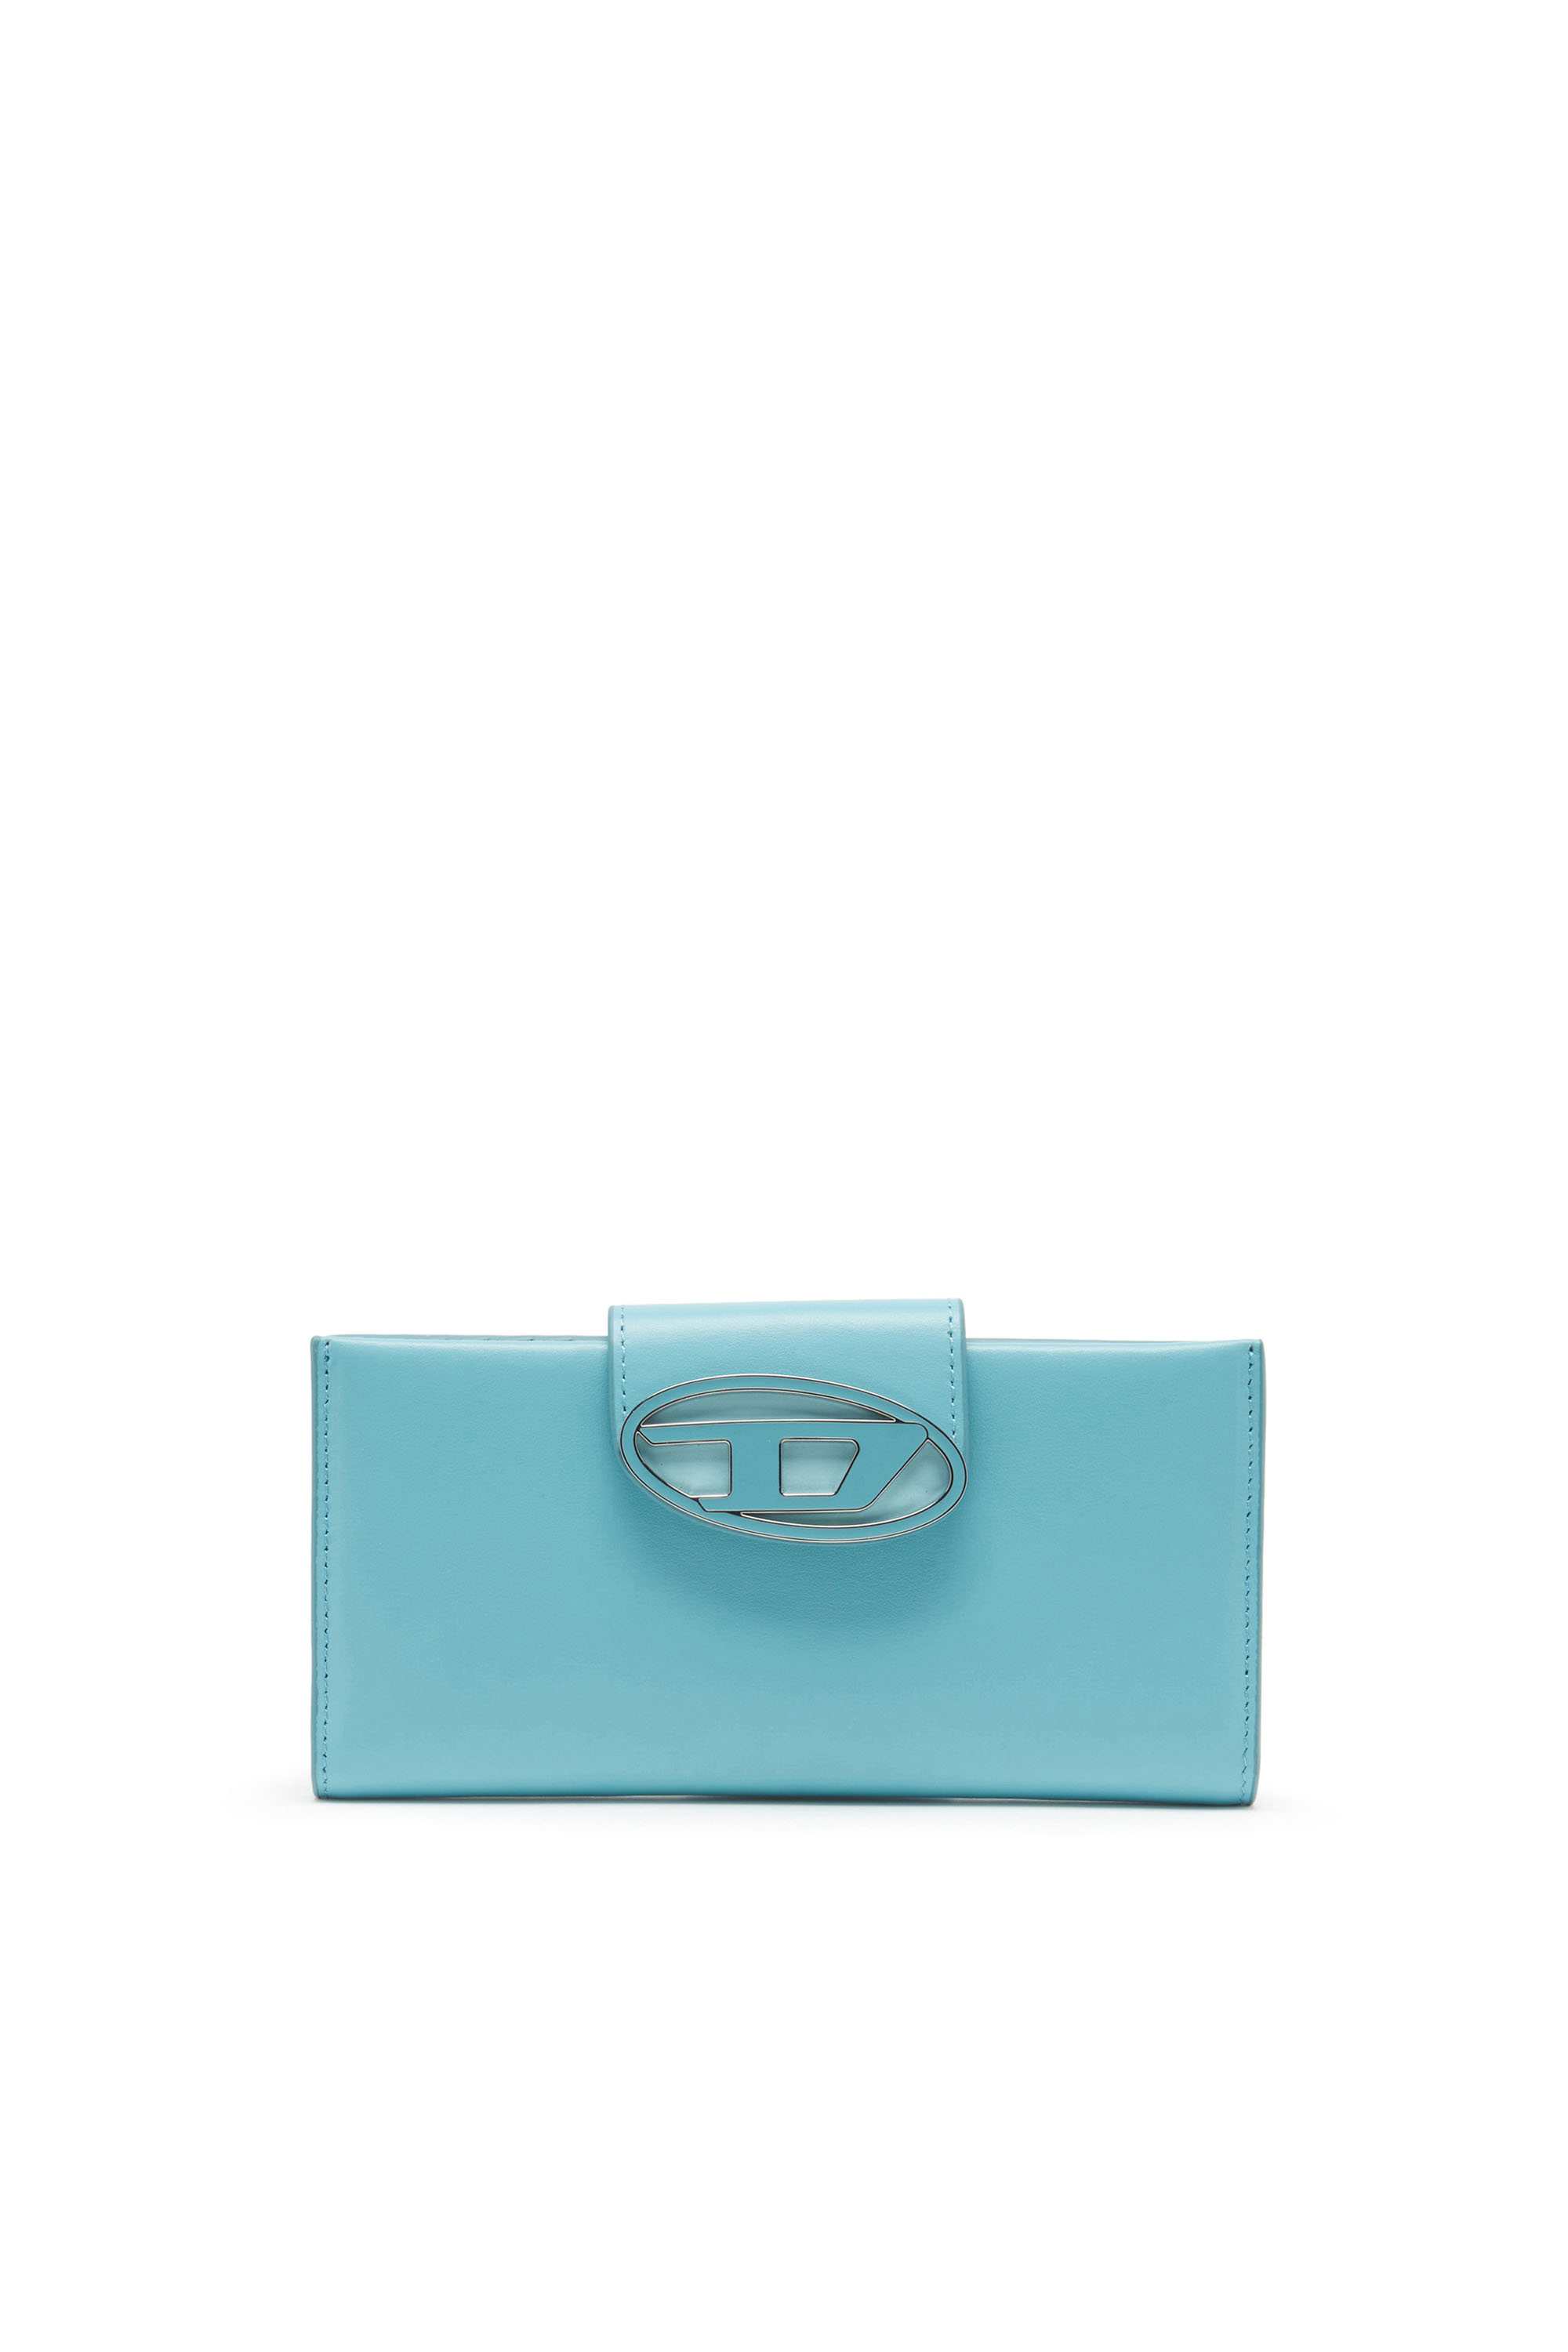 Diesel - Leather continental wallet - Small Wallets - Woman - Blue